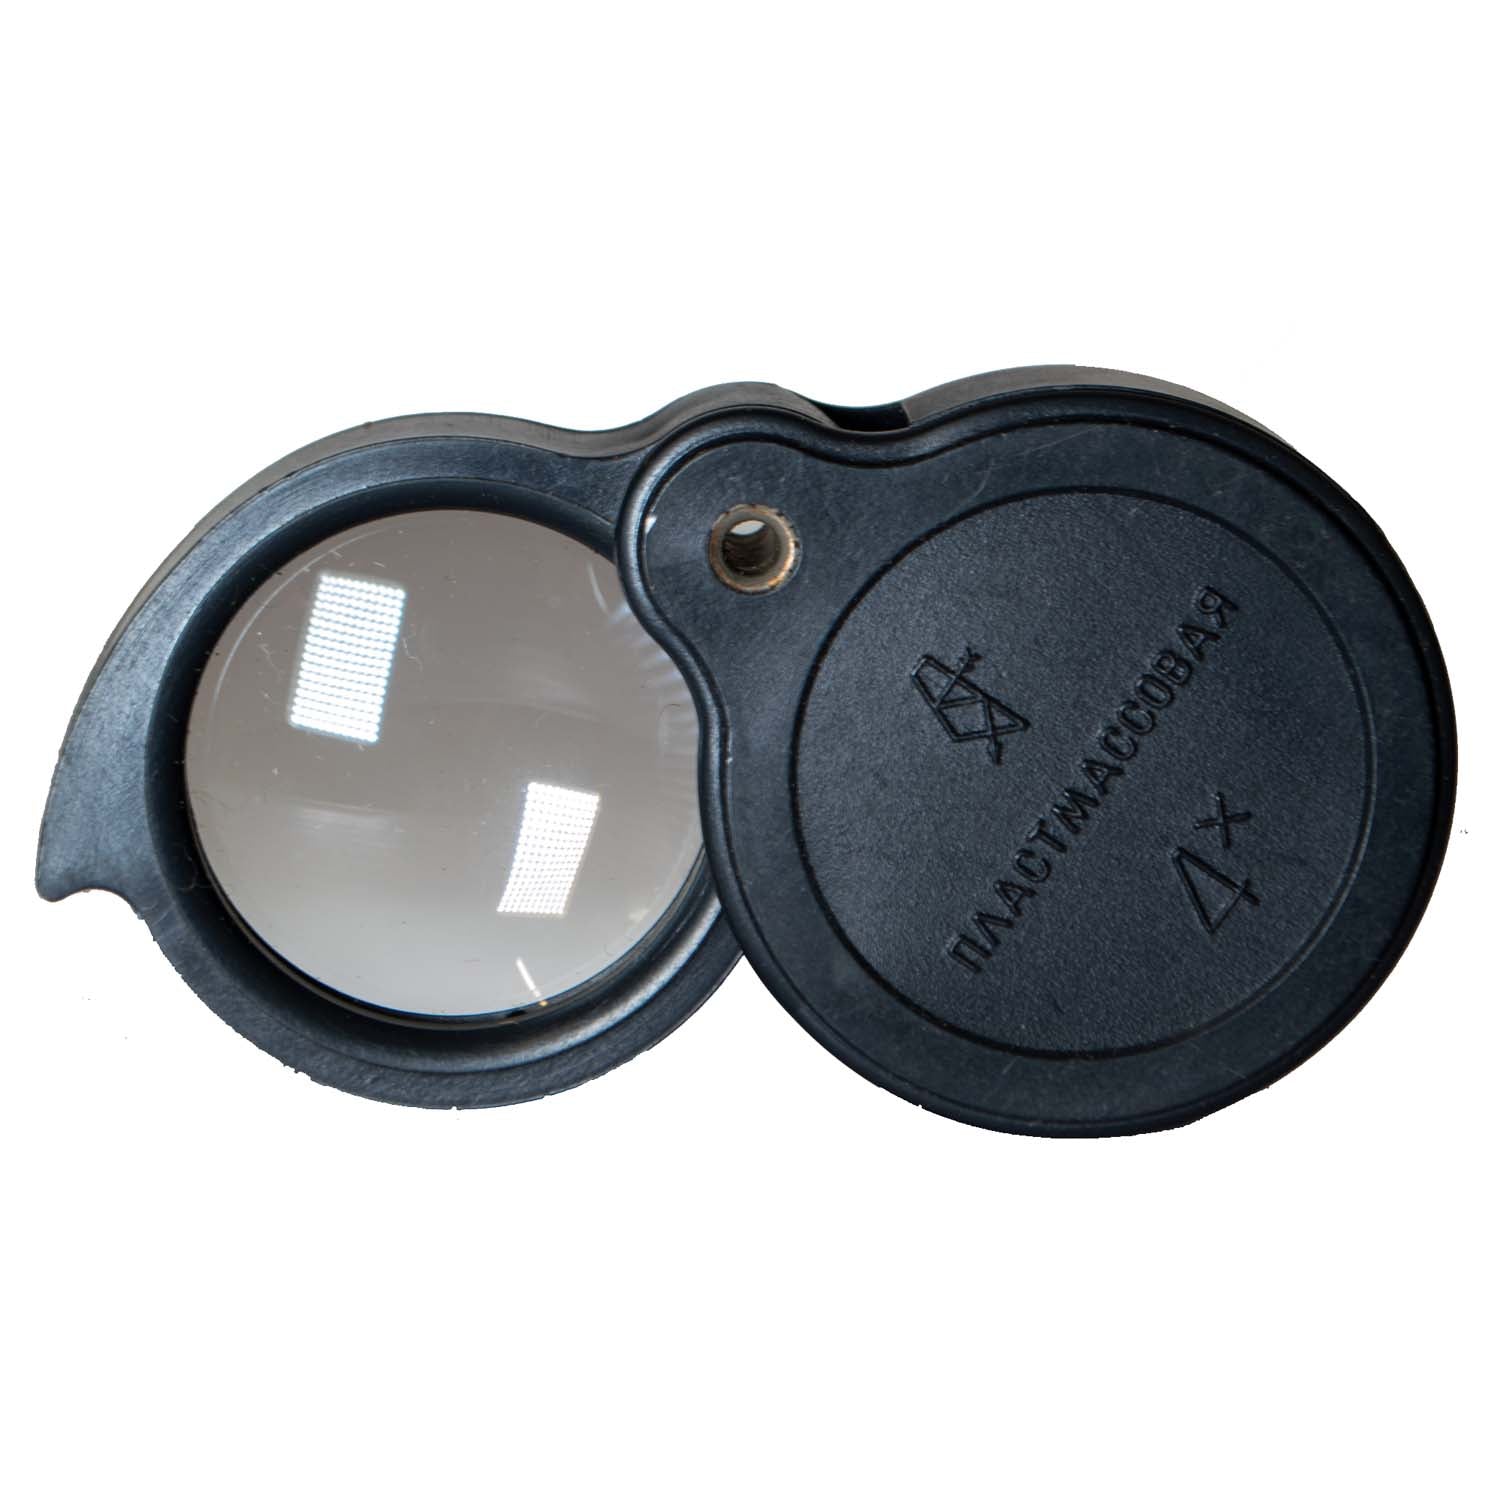 Folding Magnifier - round, in hard case